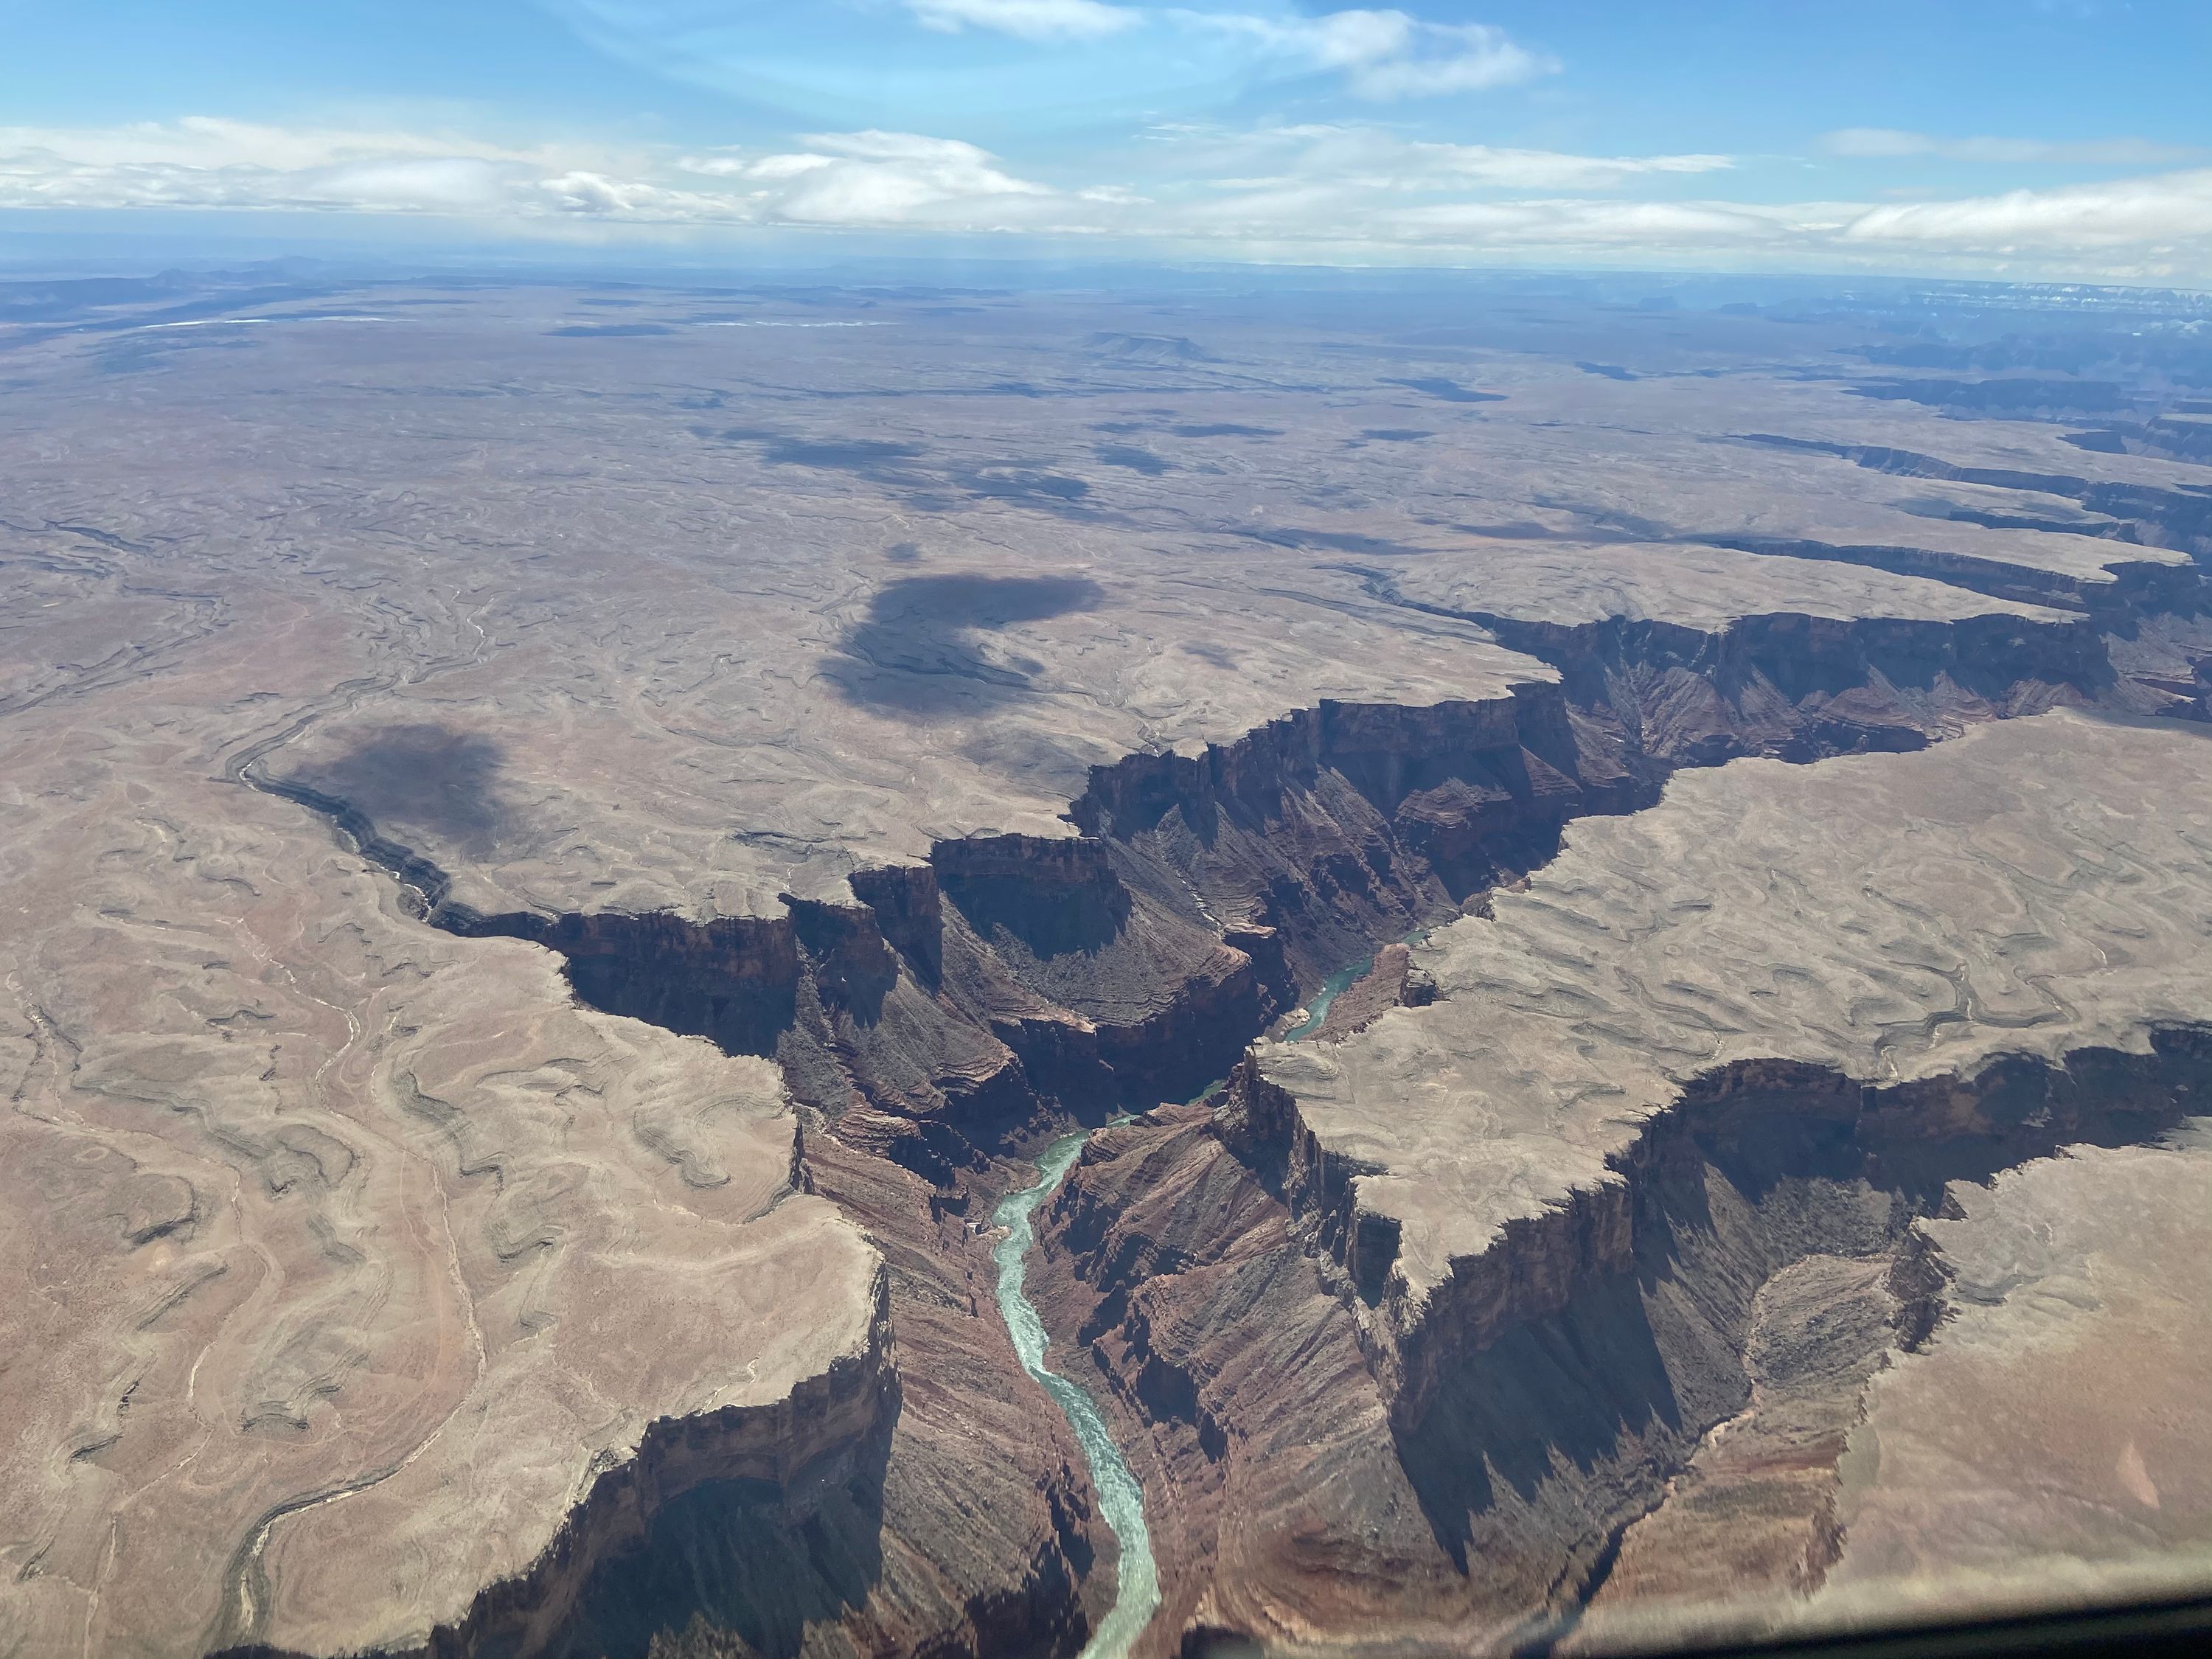 Flying over the Grand Canyon heading into Page